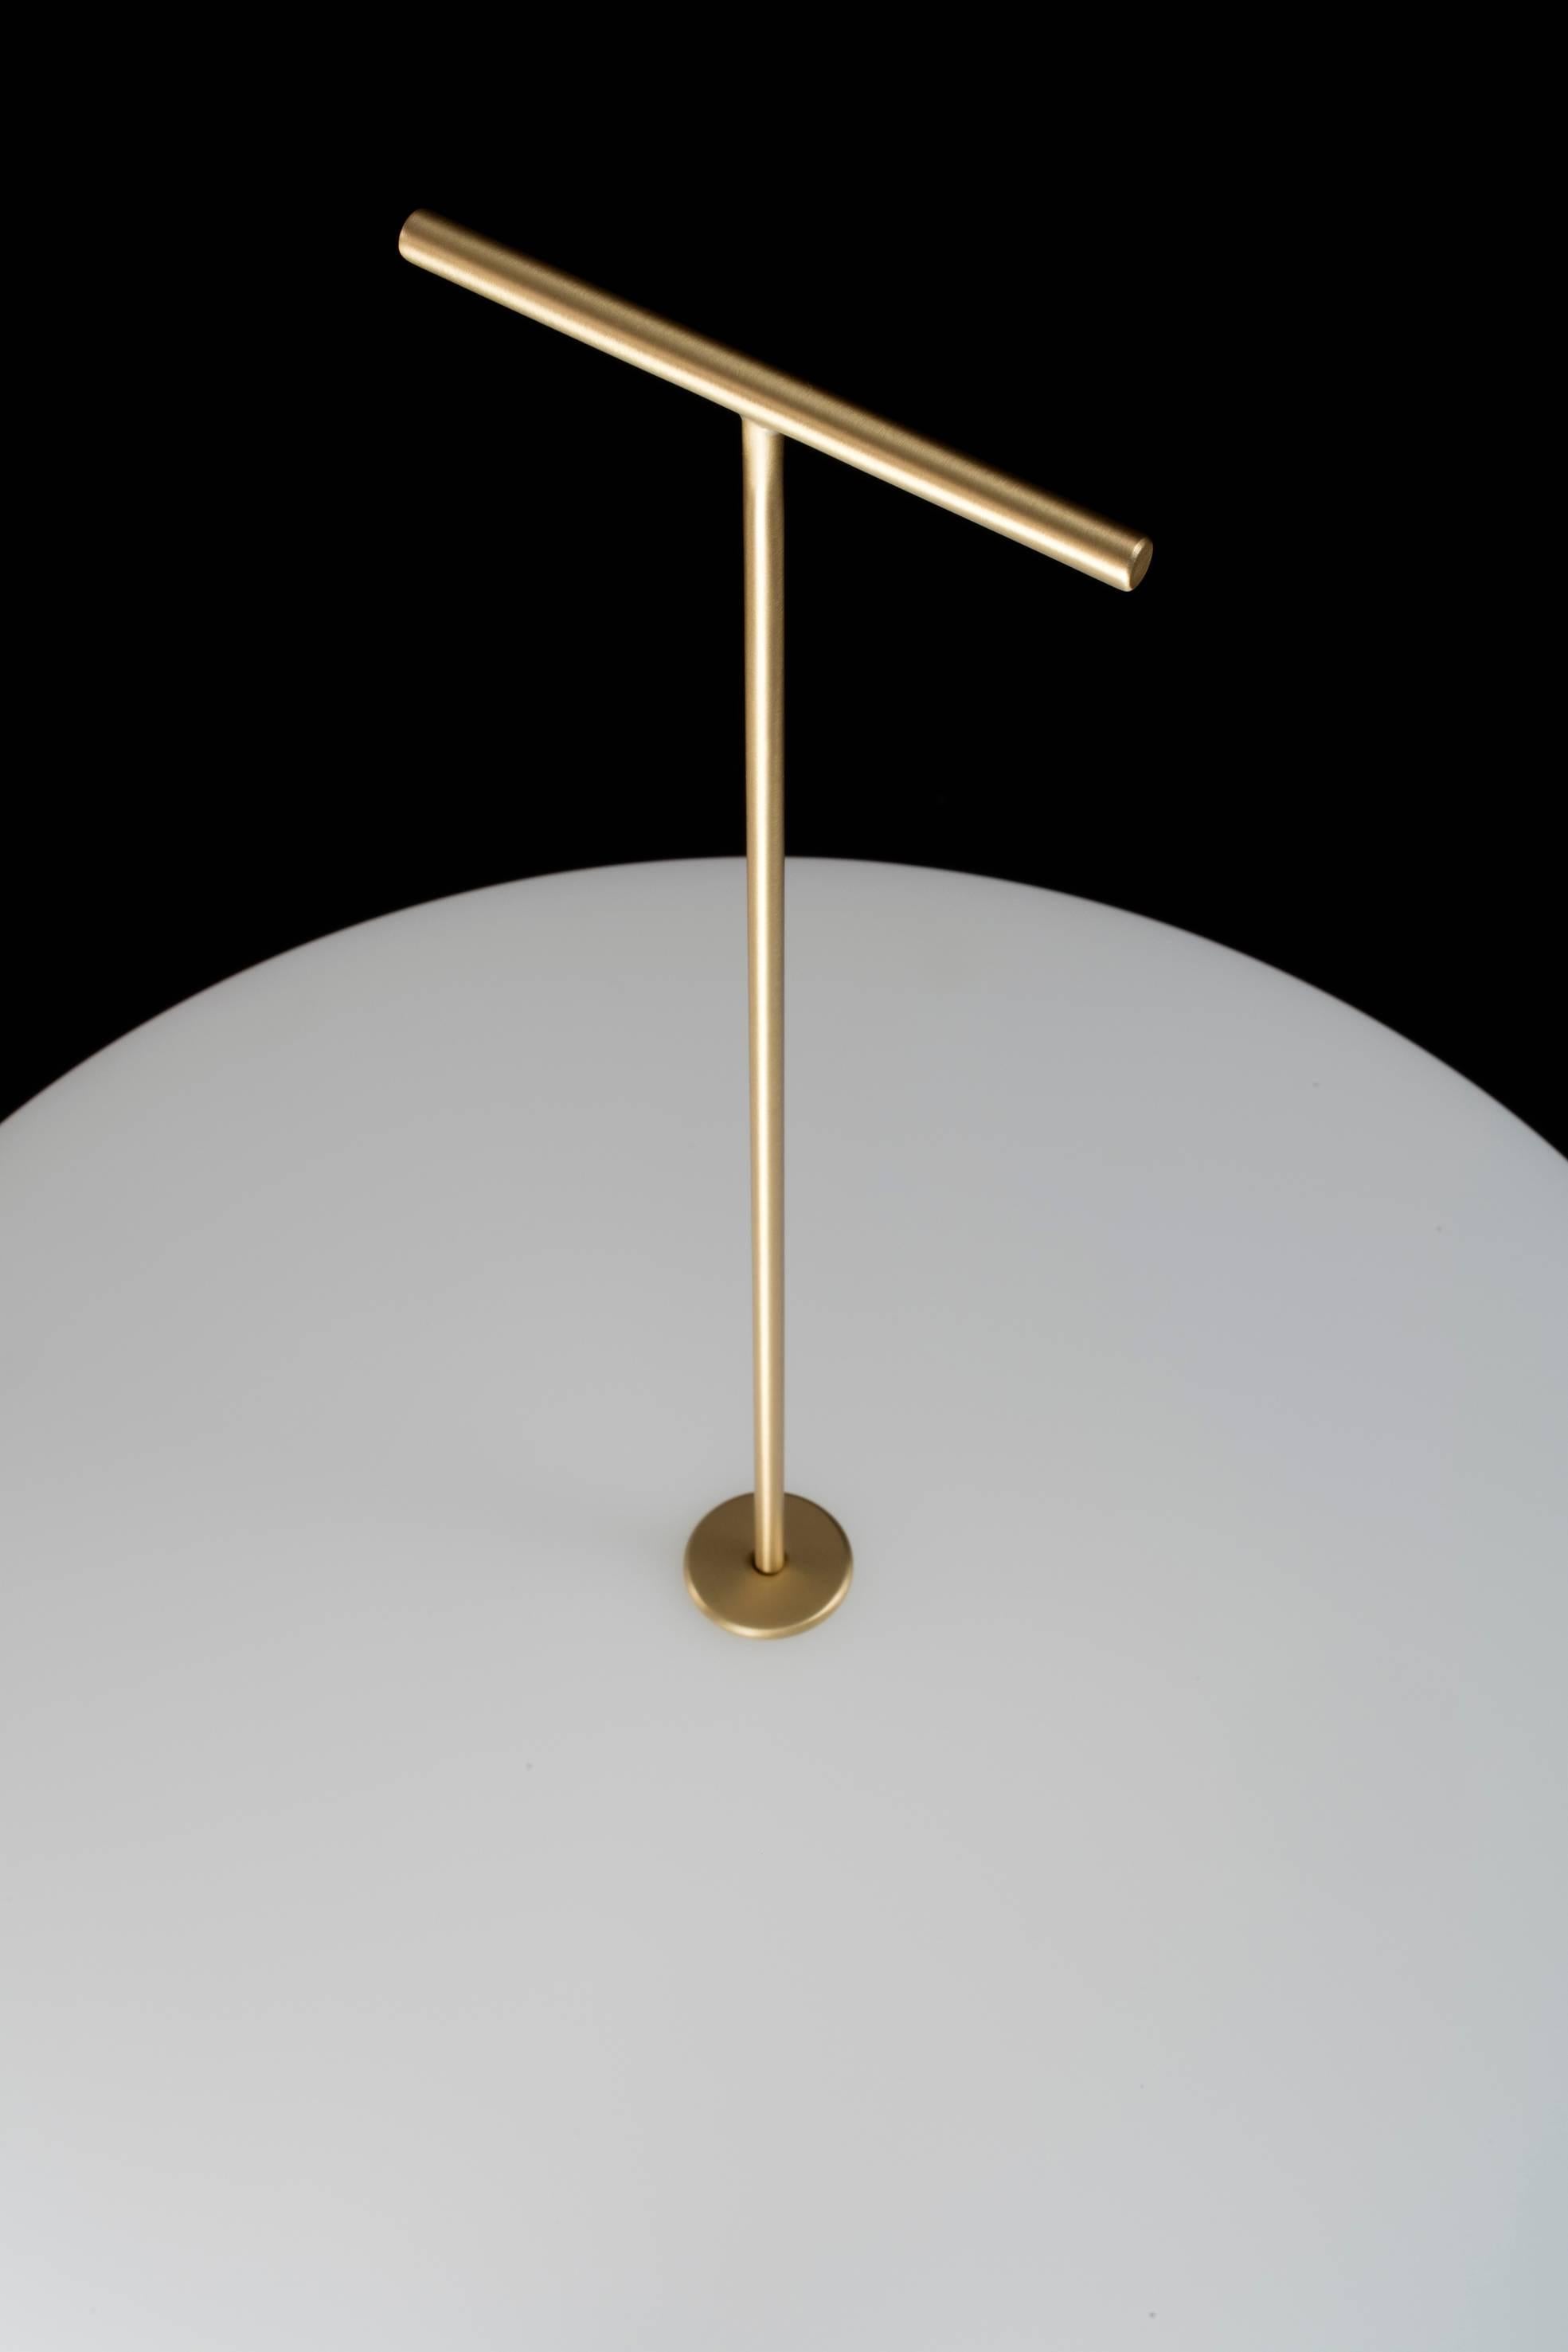 The Luna Lamp is a piece that has never been put in production until now. 

It has previously been exhibited on one occasion at the Milan Triennale in 1957, but never made available to the public. 

It is a floor-standing lamp with a thin brushed